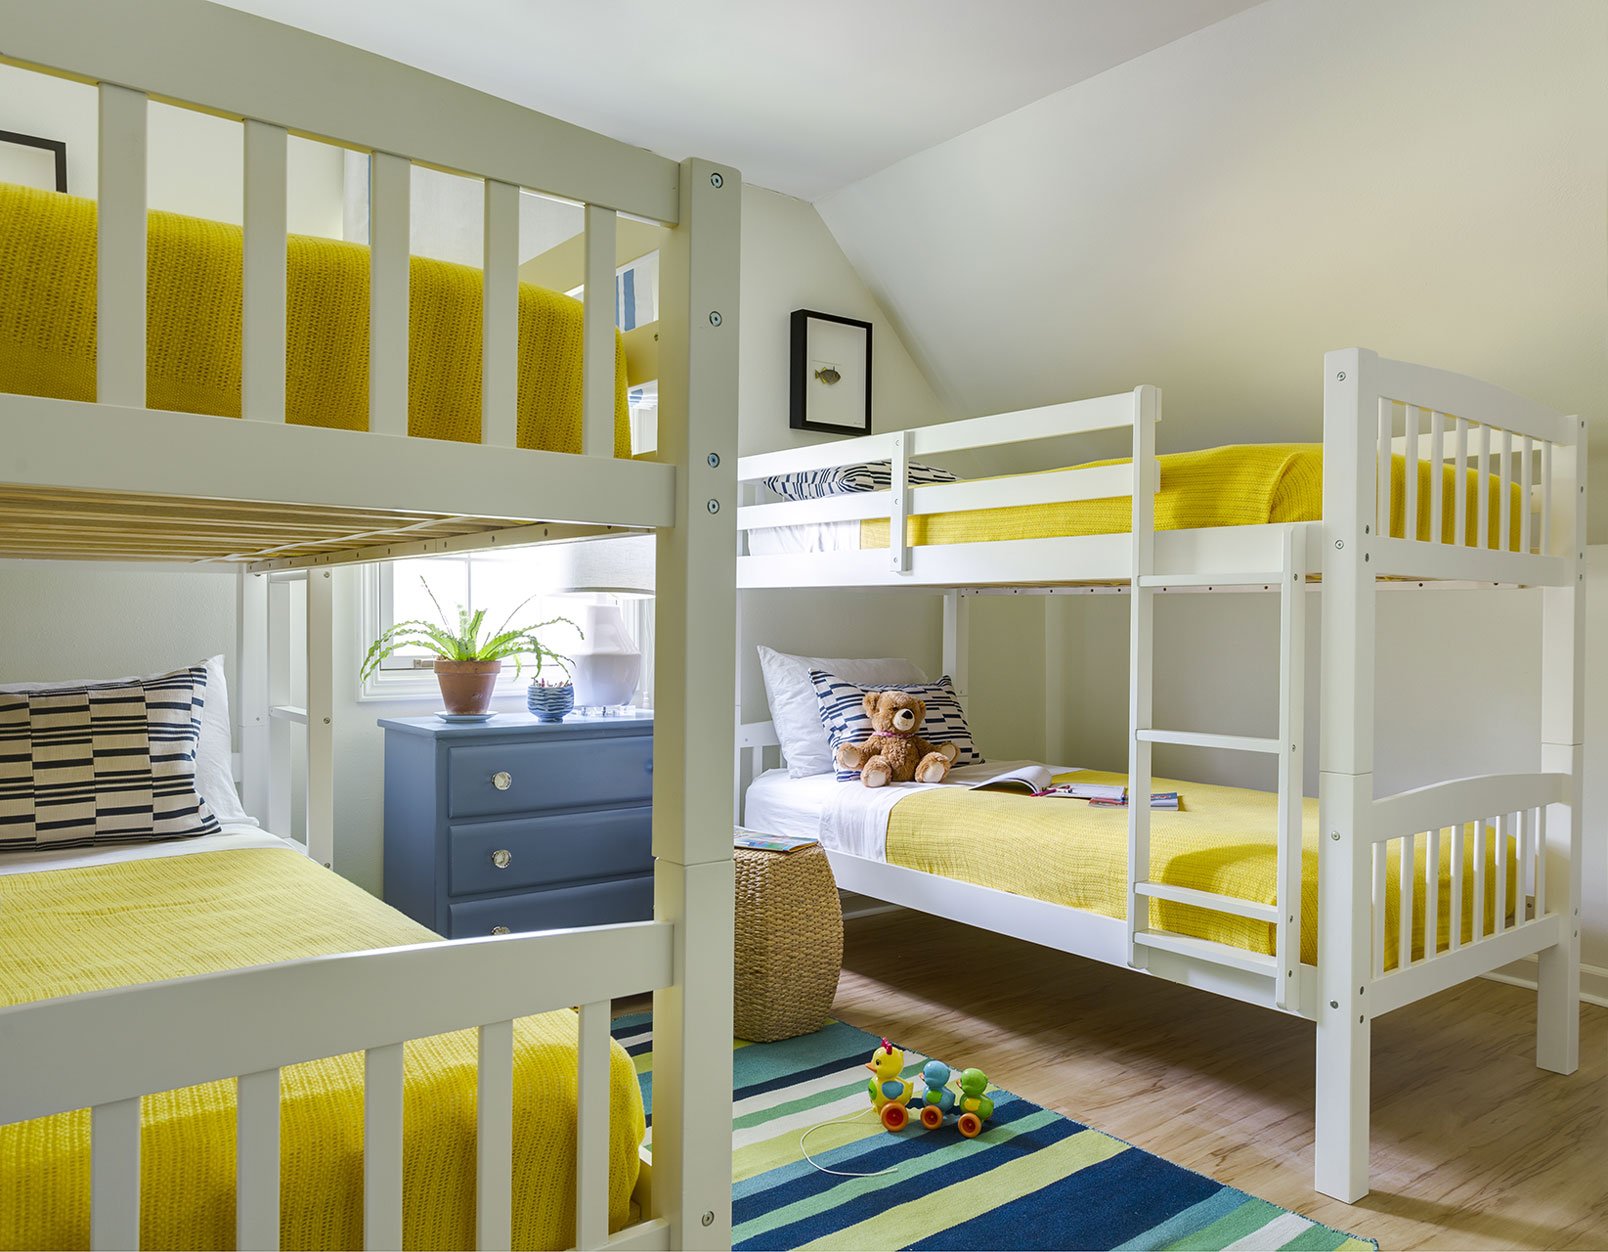 Borough Shores - Susan Walsh Interiors - Photographed by Rett Peek for At Home in Arkansas magazine - 9 Bunk Beds.jpg